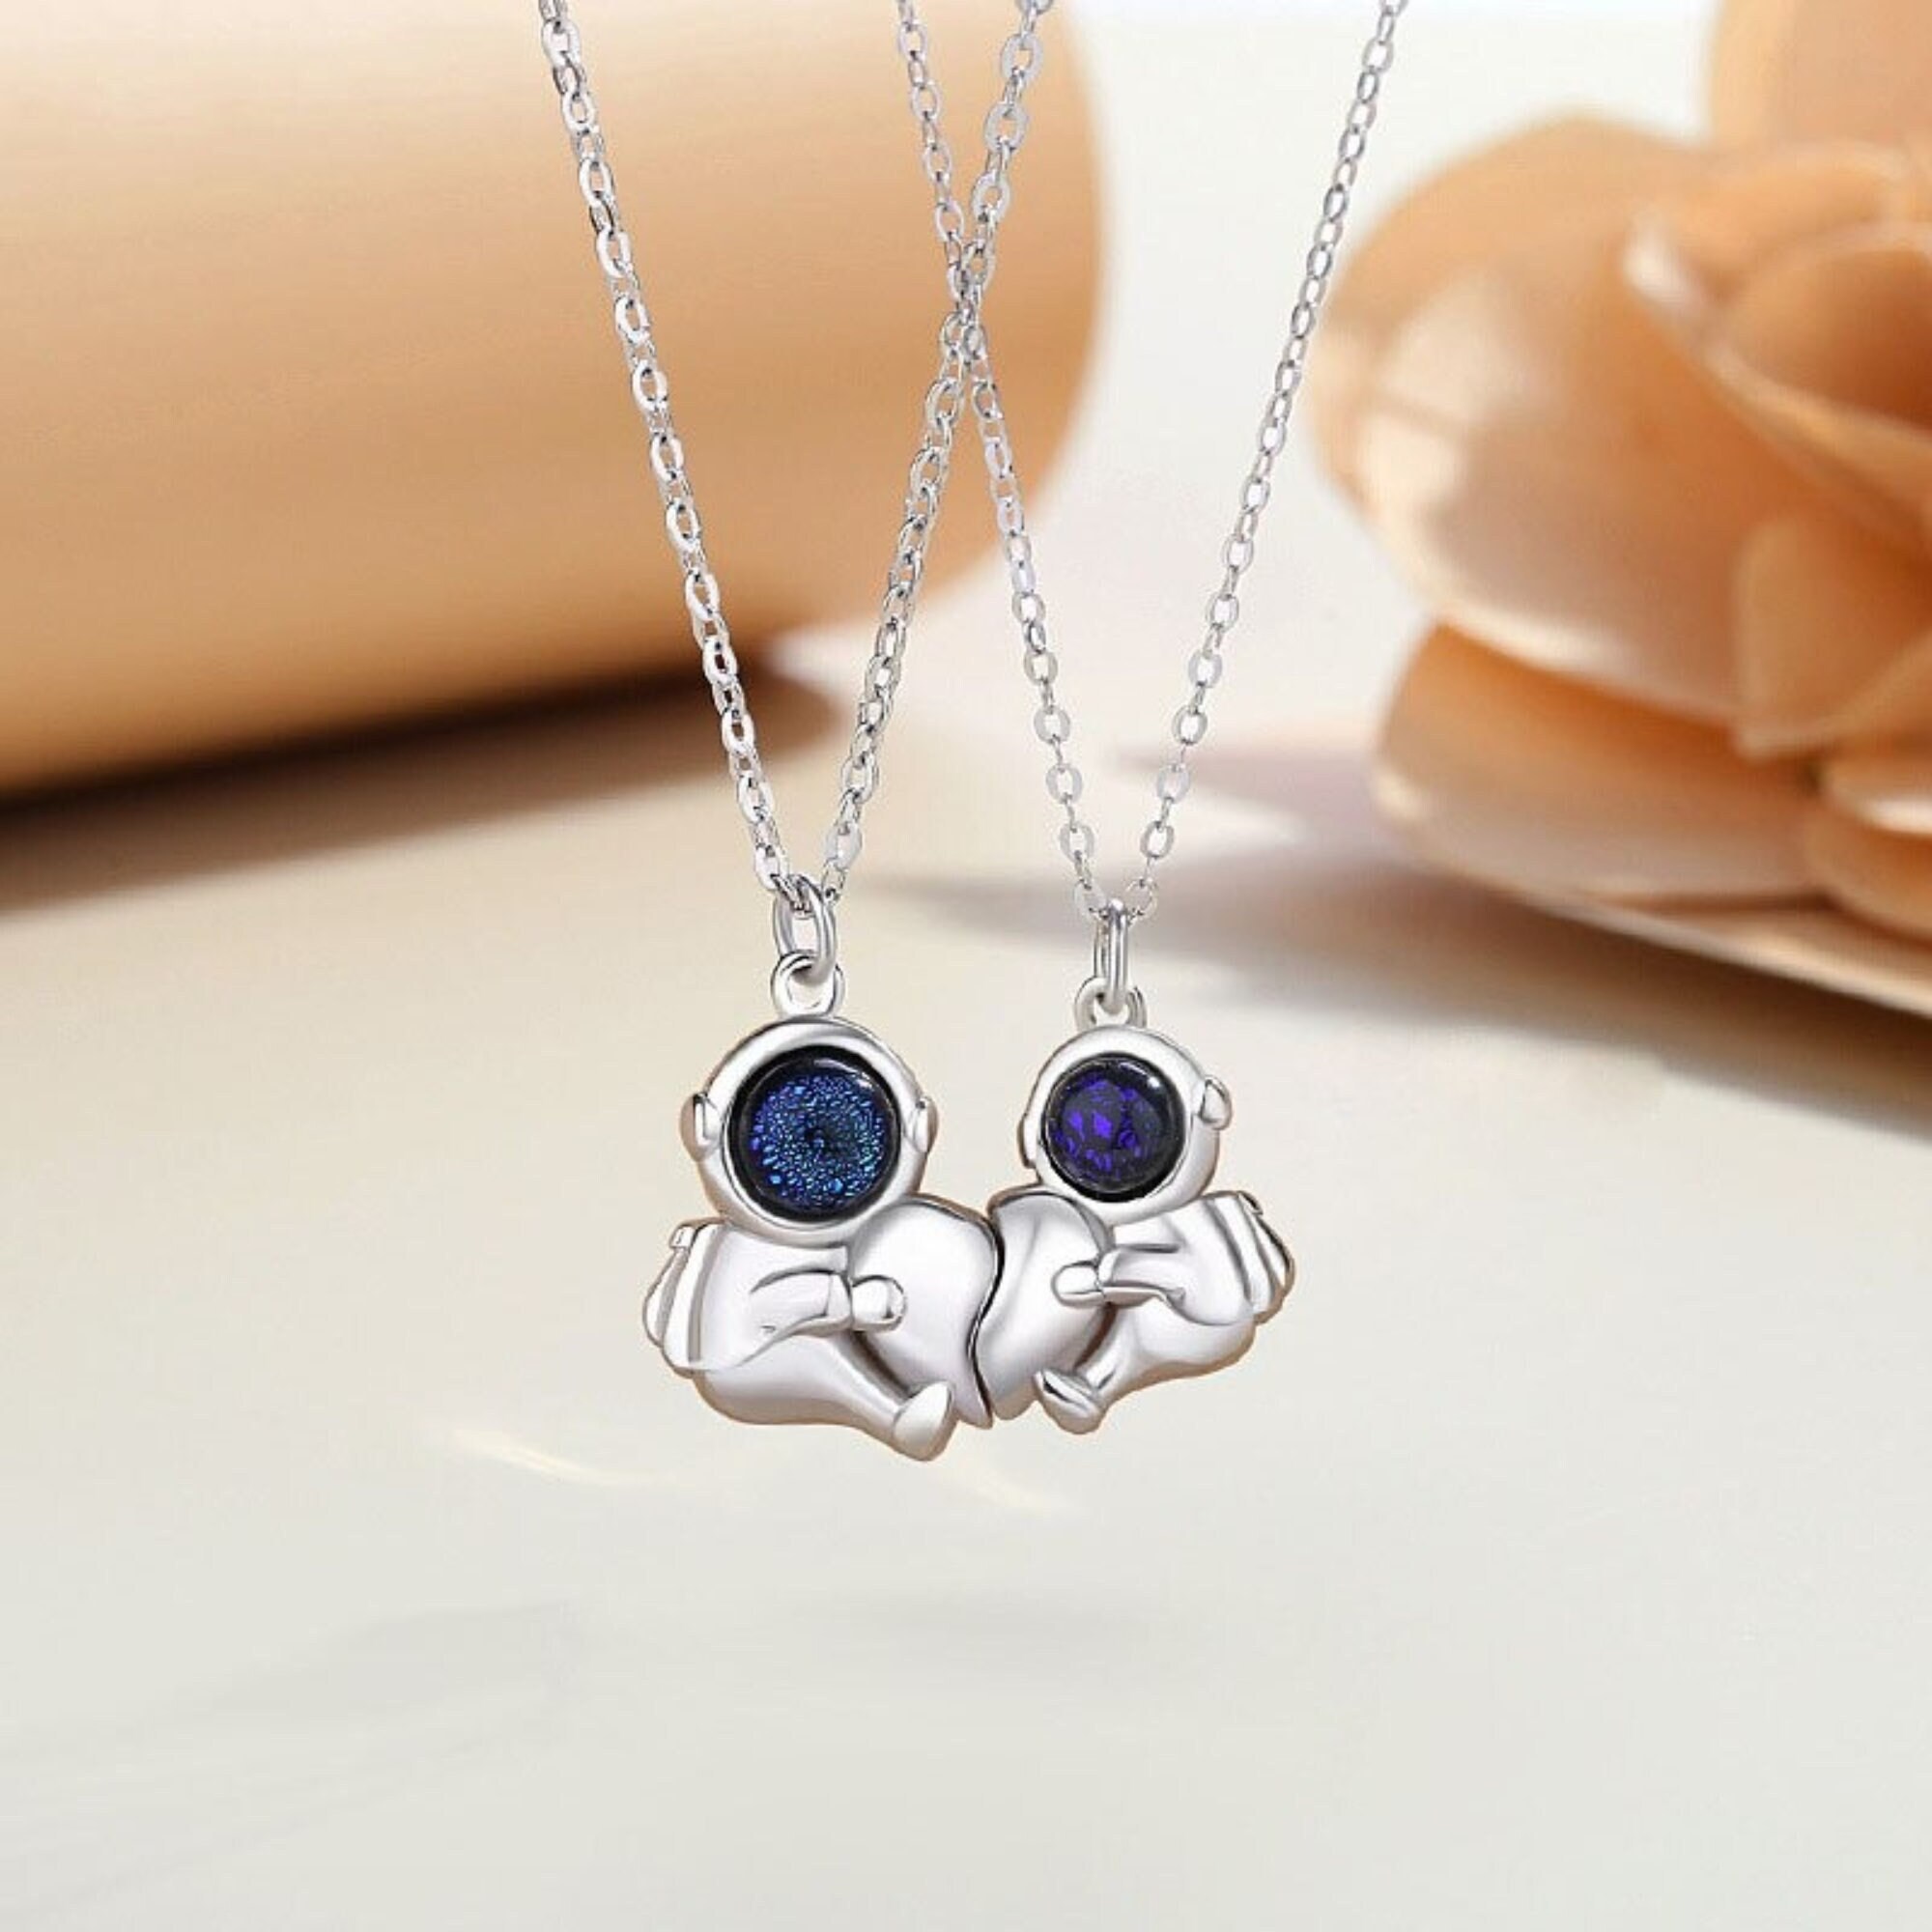 Necklace A Couple Magnet Necklaces Pair of Love Necklaces Love Creative  Necklaces & Pendants Necklace for Women Fashion Jewelry